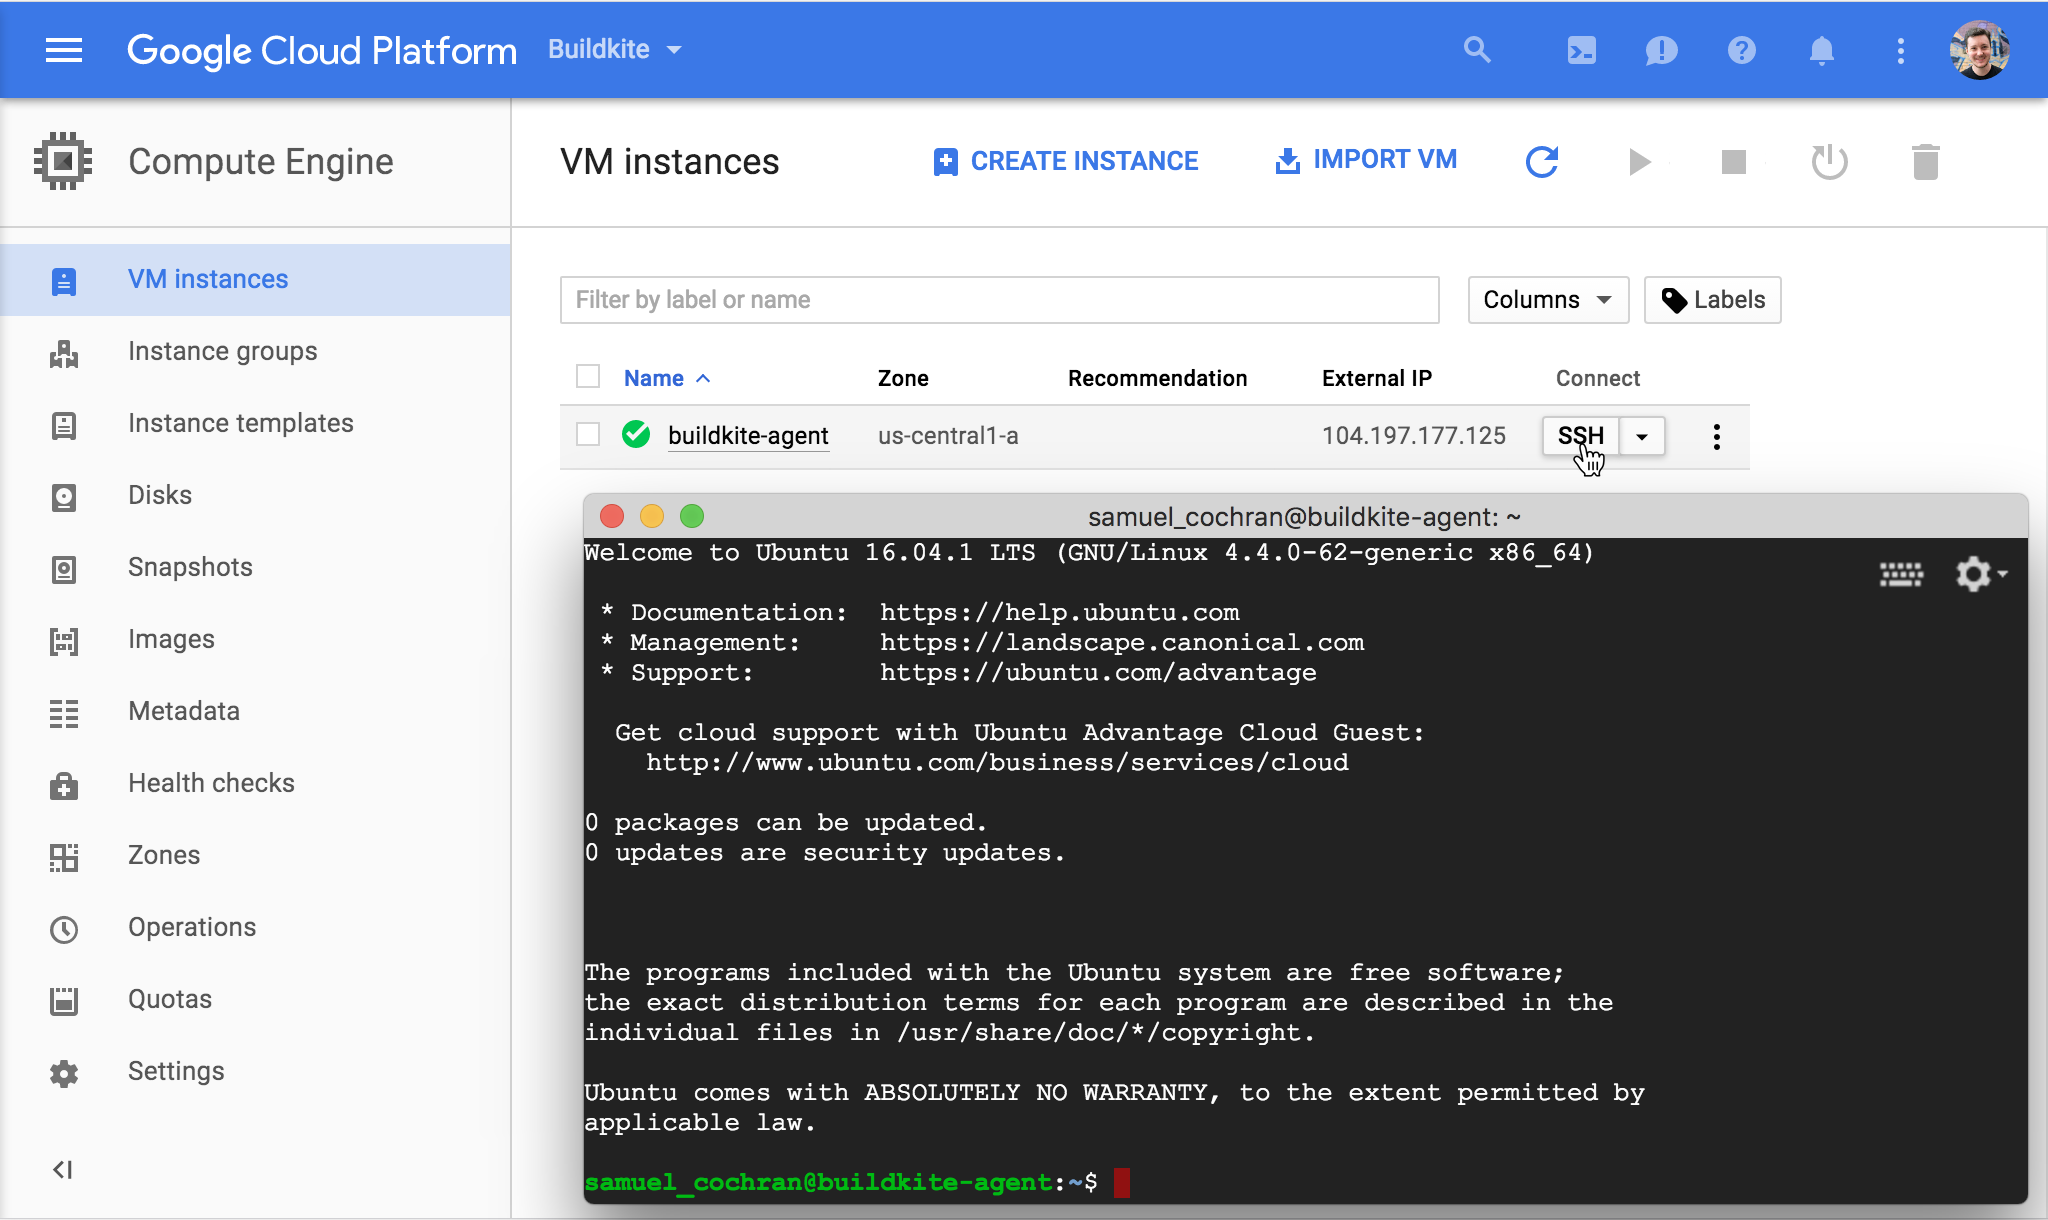 Screenshot of connecting to a Google Compute Engine instance using the Google Cloud Console